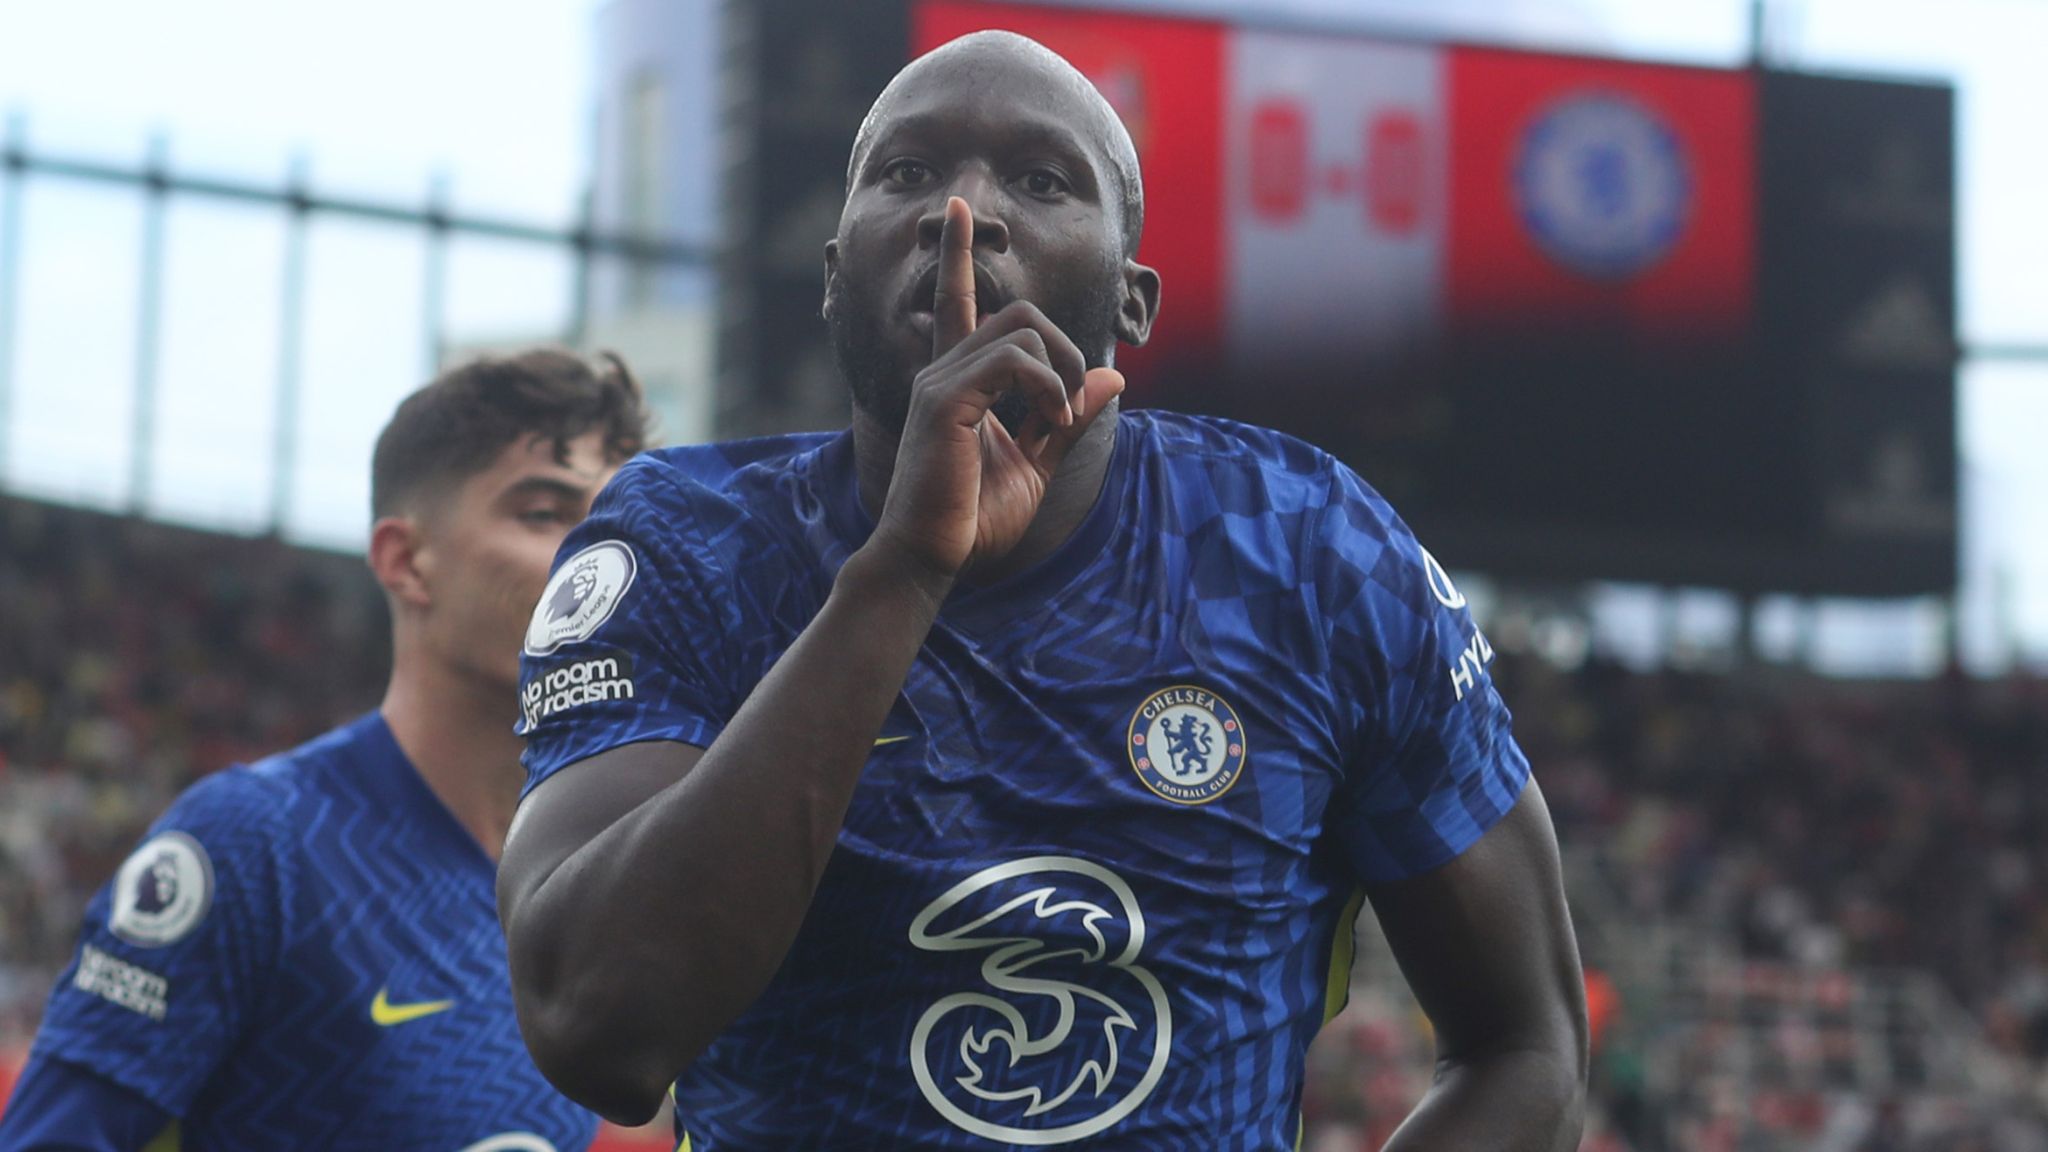 Lukaku scores his first Chelsea goal in a dominant win over Arsenal